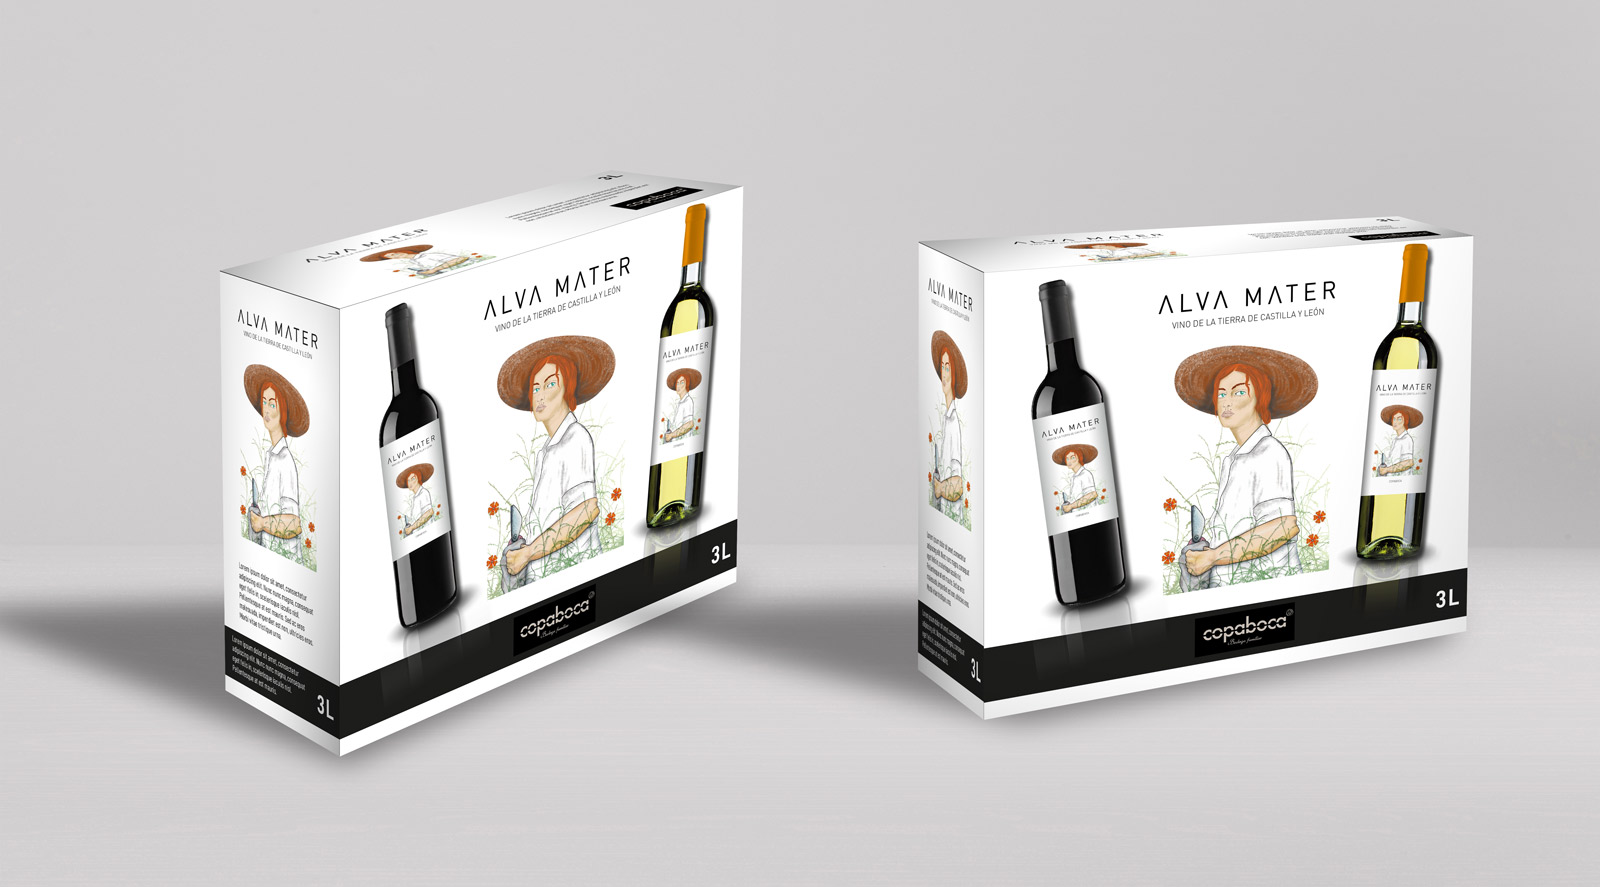 Graphic and creative design of wine labels and packaging for ALVA MATER